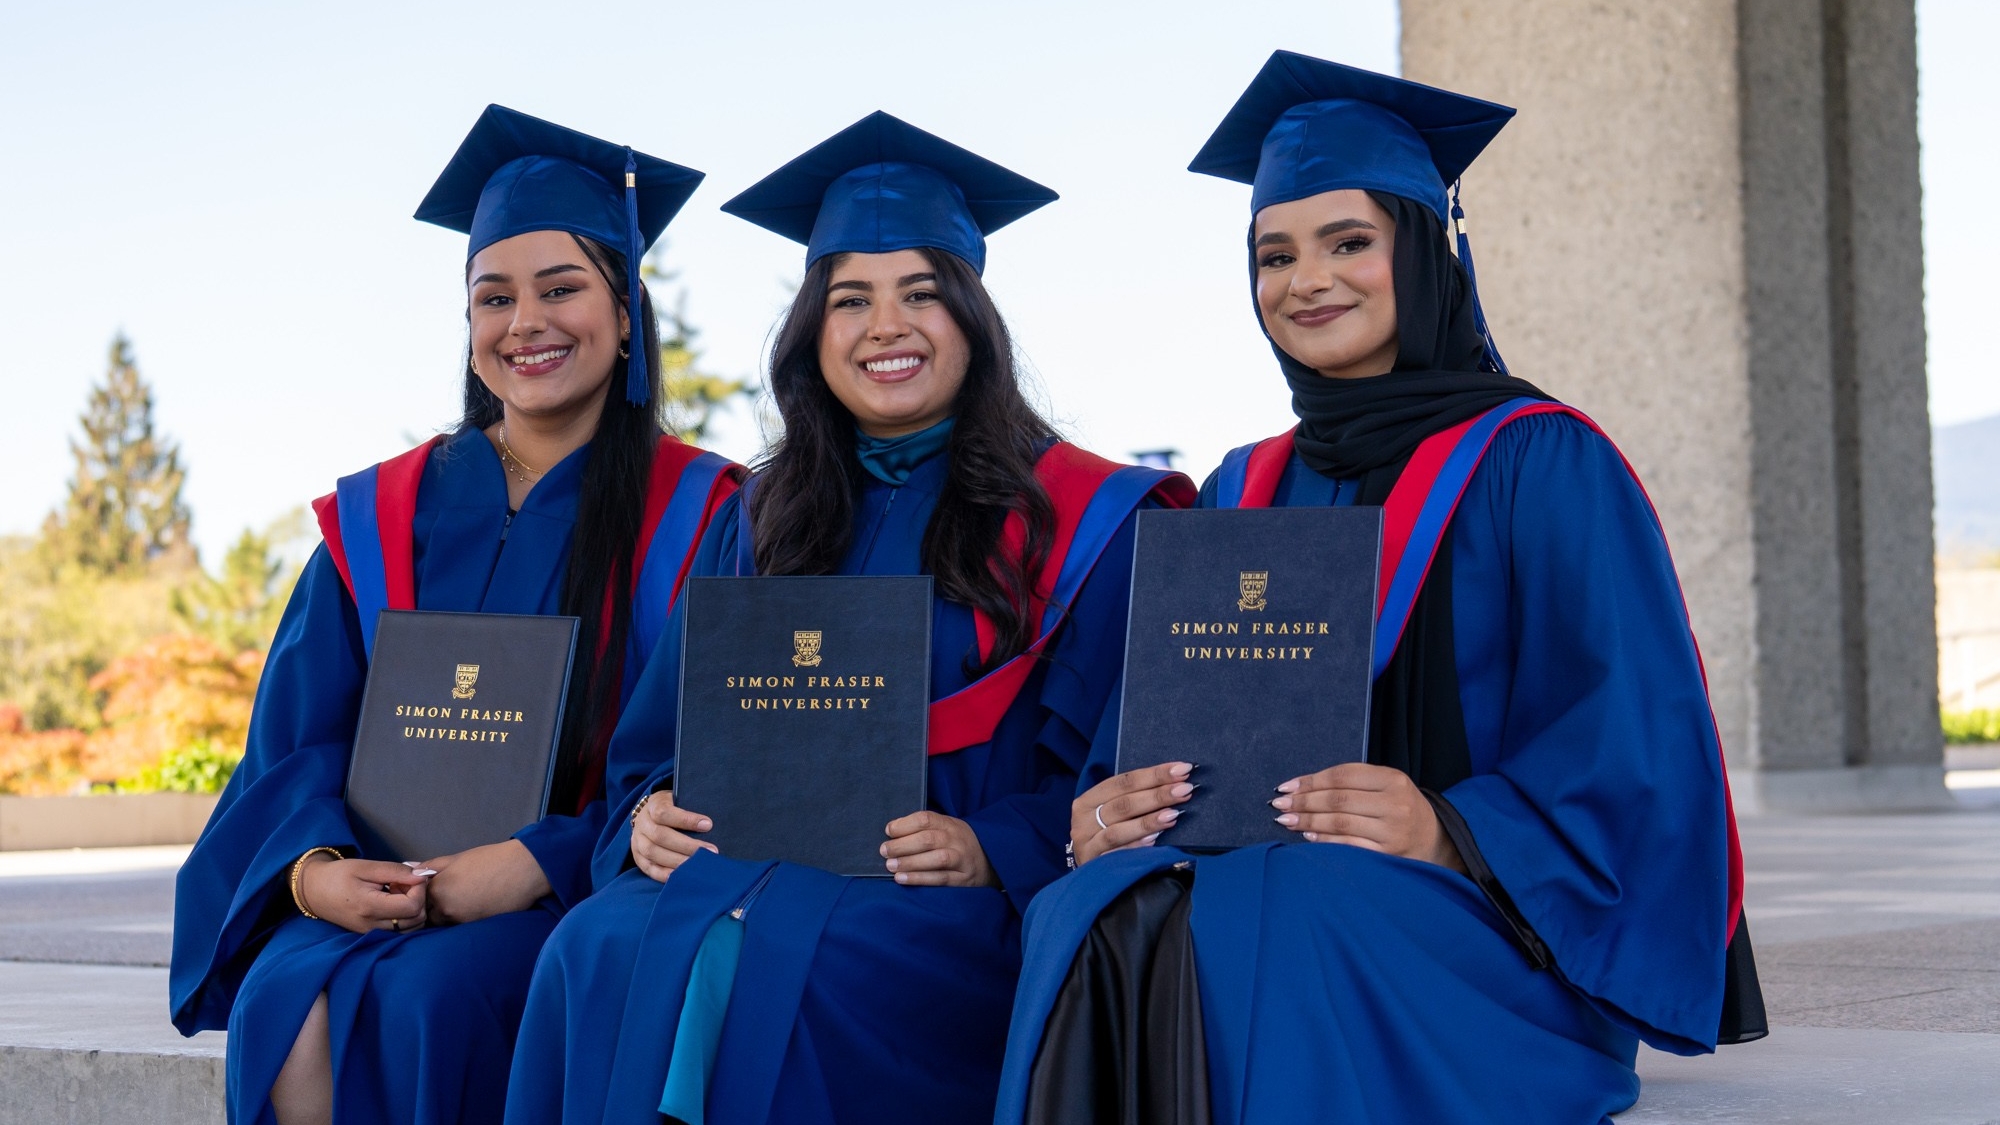 Three FASS graduates sitting on the steps of the AQ in their red and blue regalia. The graduates are showing their parchments and smiling at the camera.